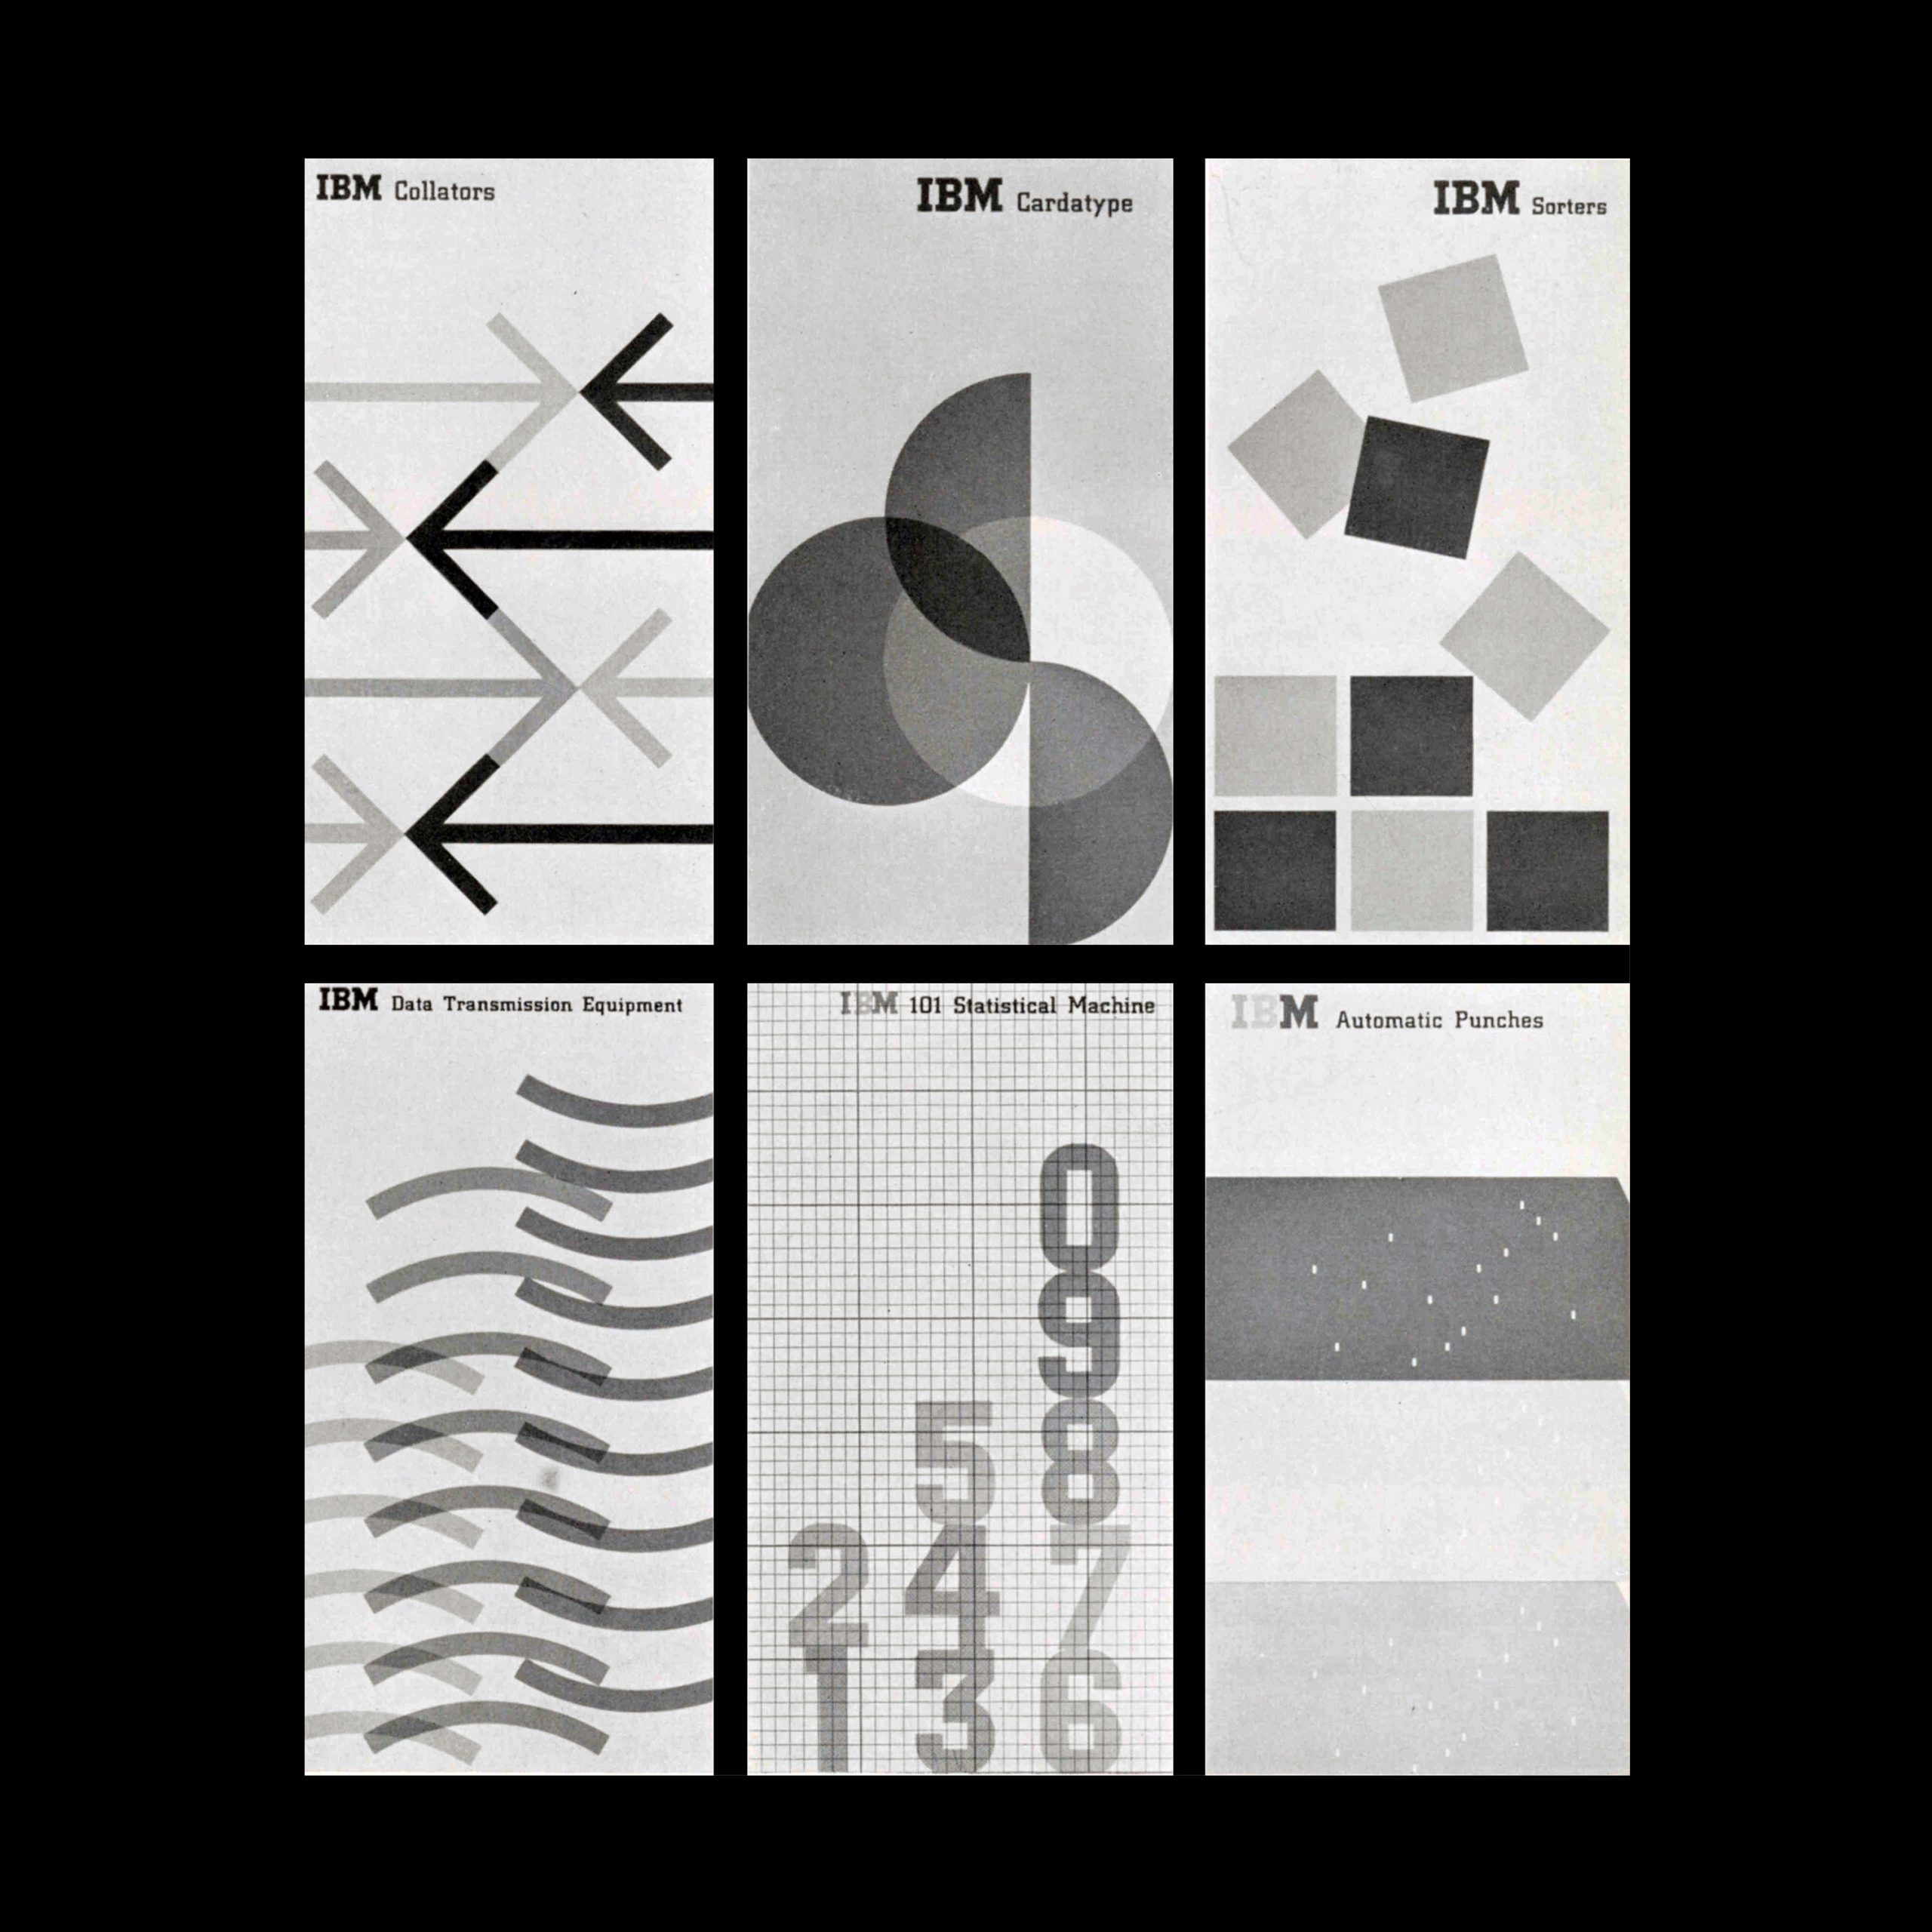 IBM, Equipment and Machine Brochures designed by Mary Beresford